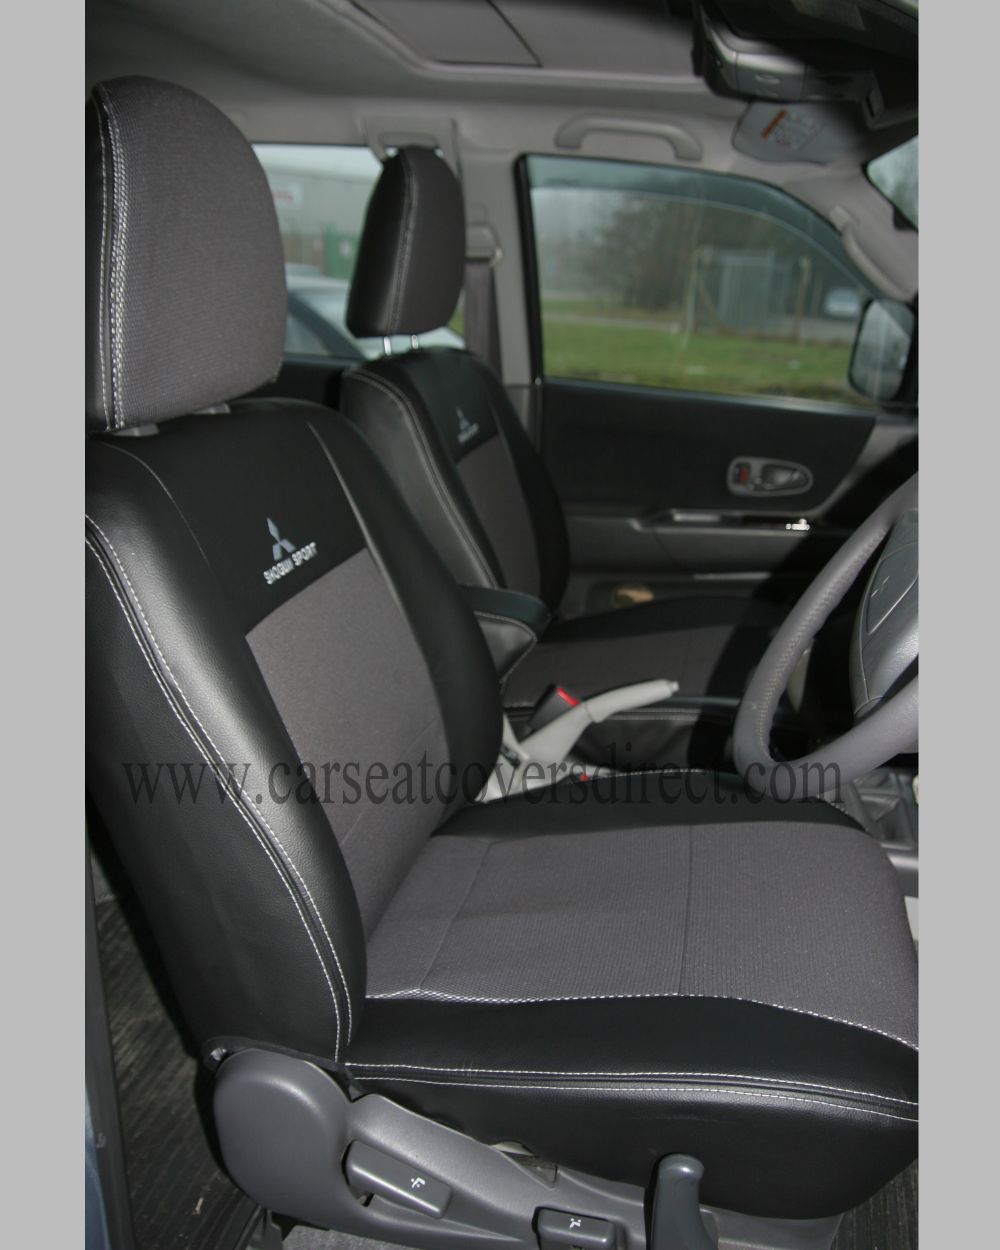 Audi A4 seat covers - Drivers seat